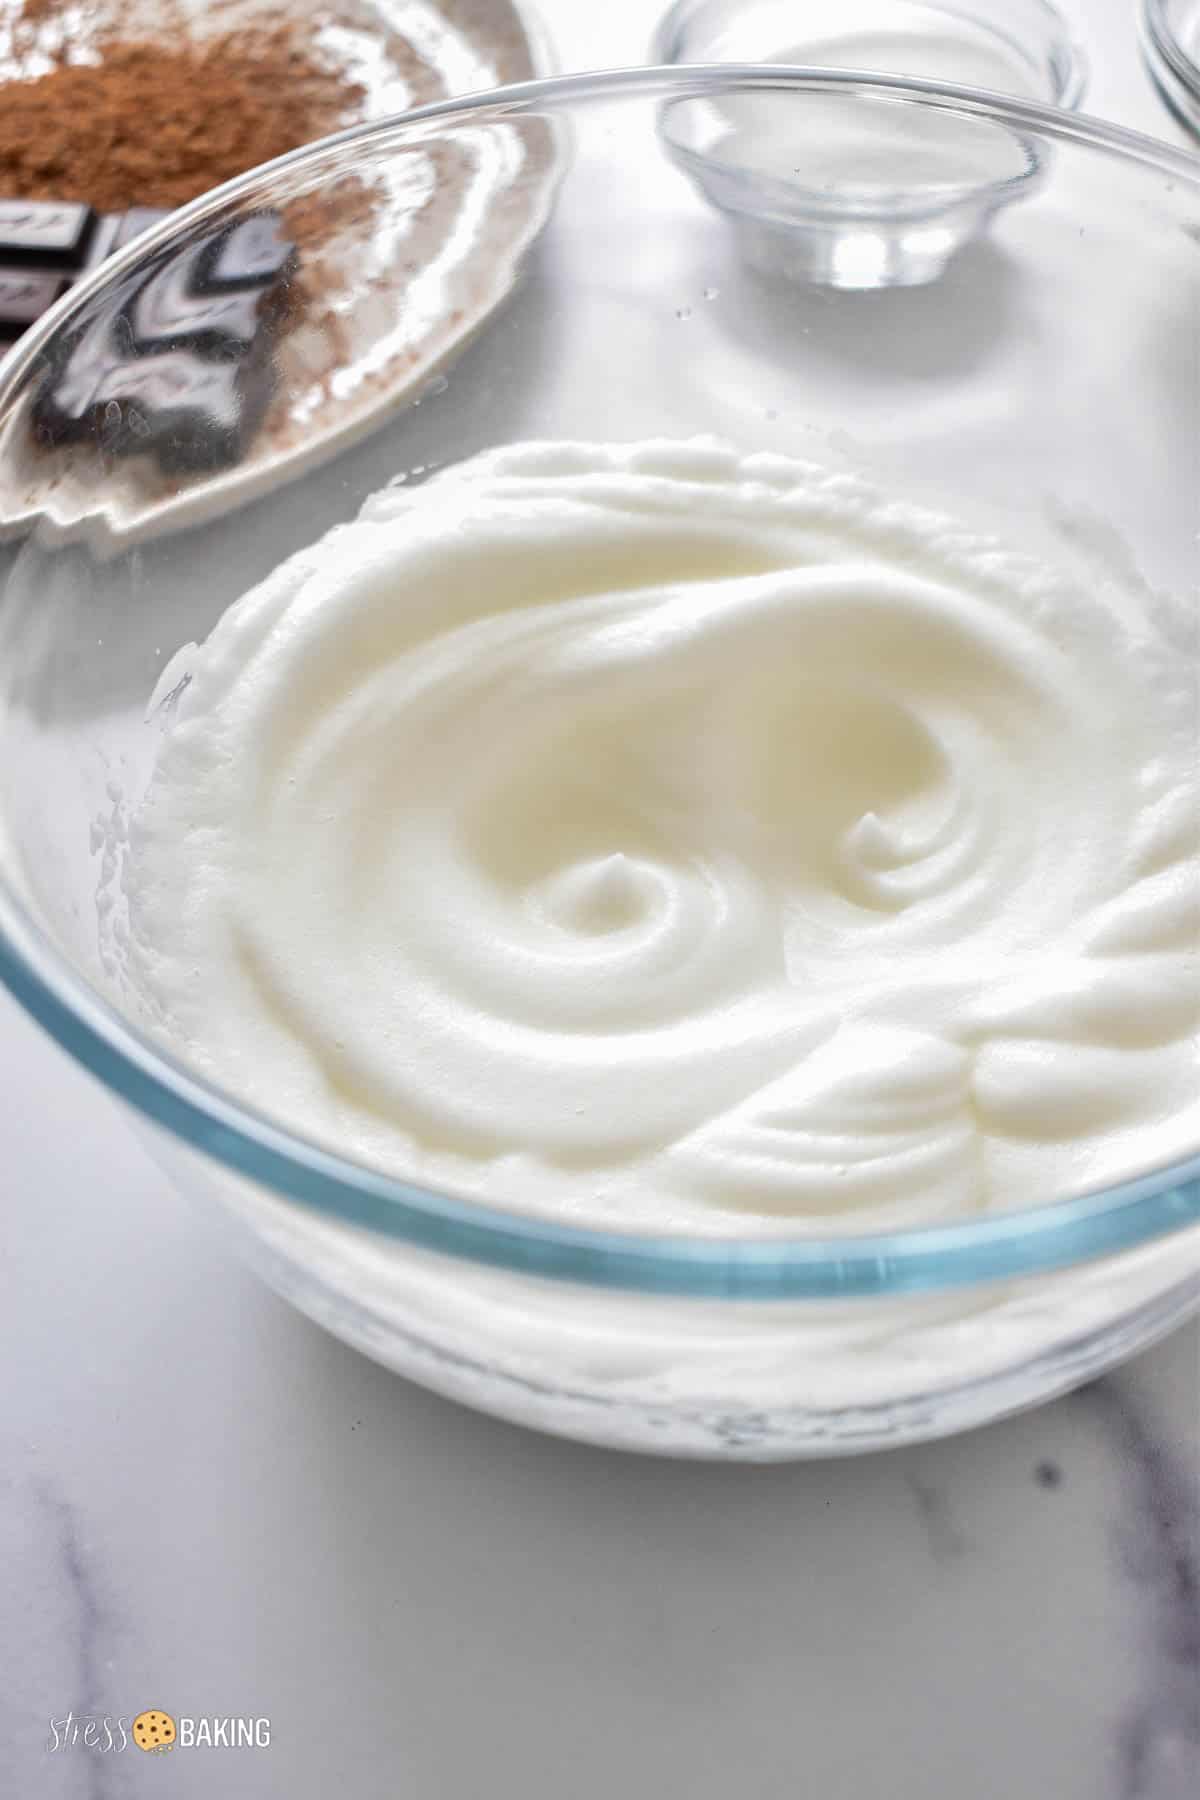 Whipped egg whites in a clear mixing bowl